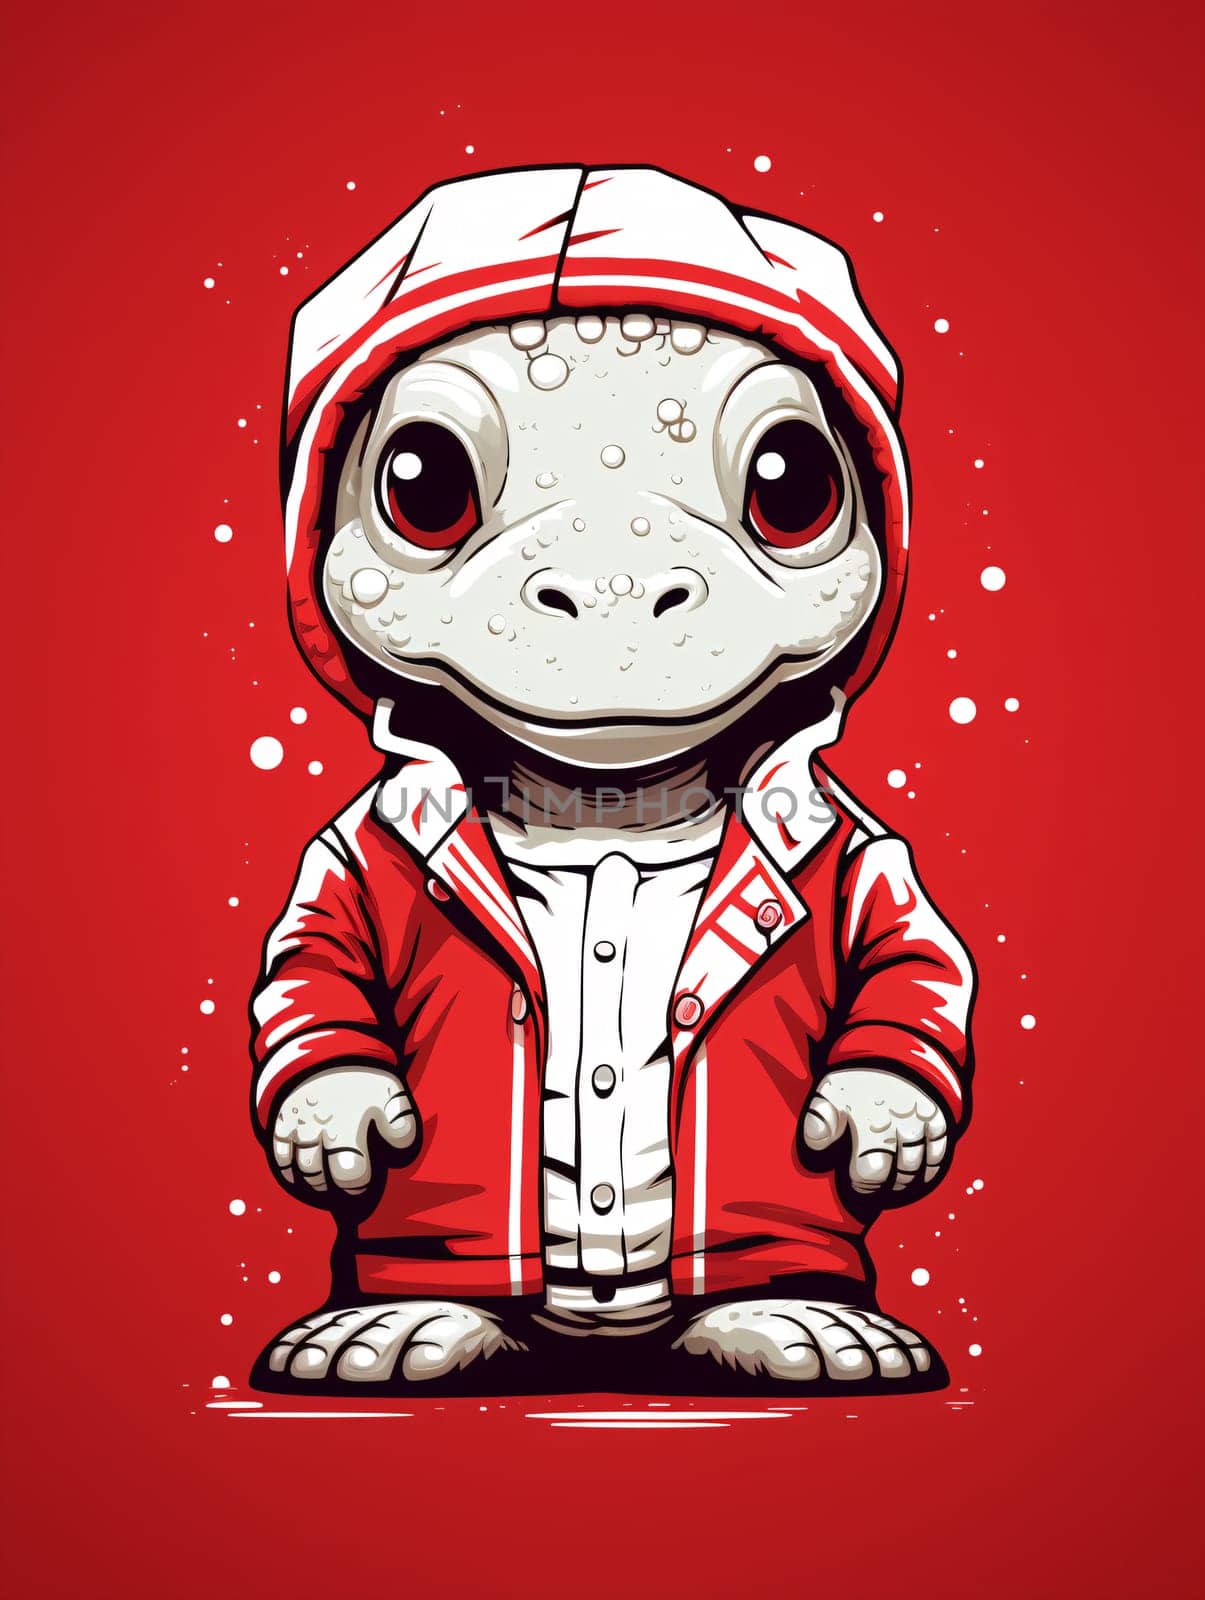 Adorable Cartoon crocodile in Red Hoodie on Red Background by chrisroll